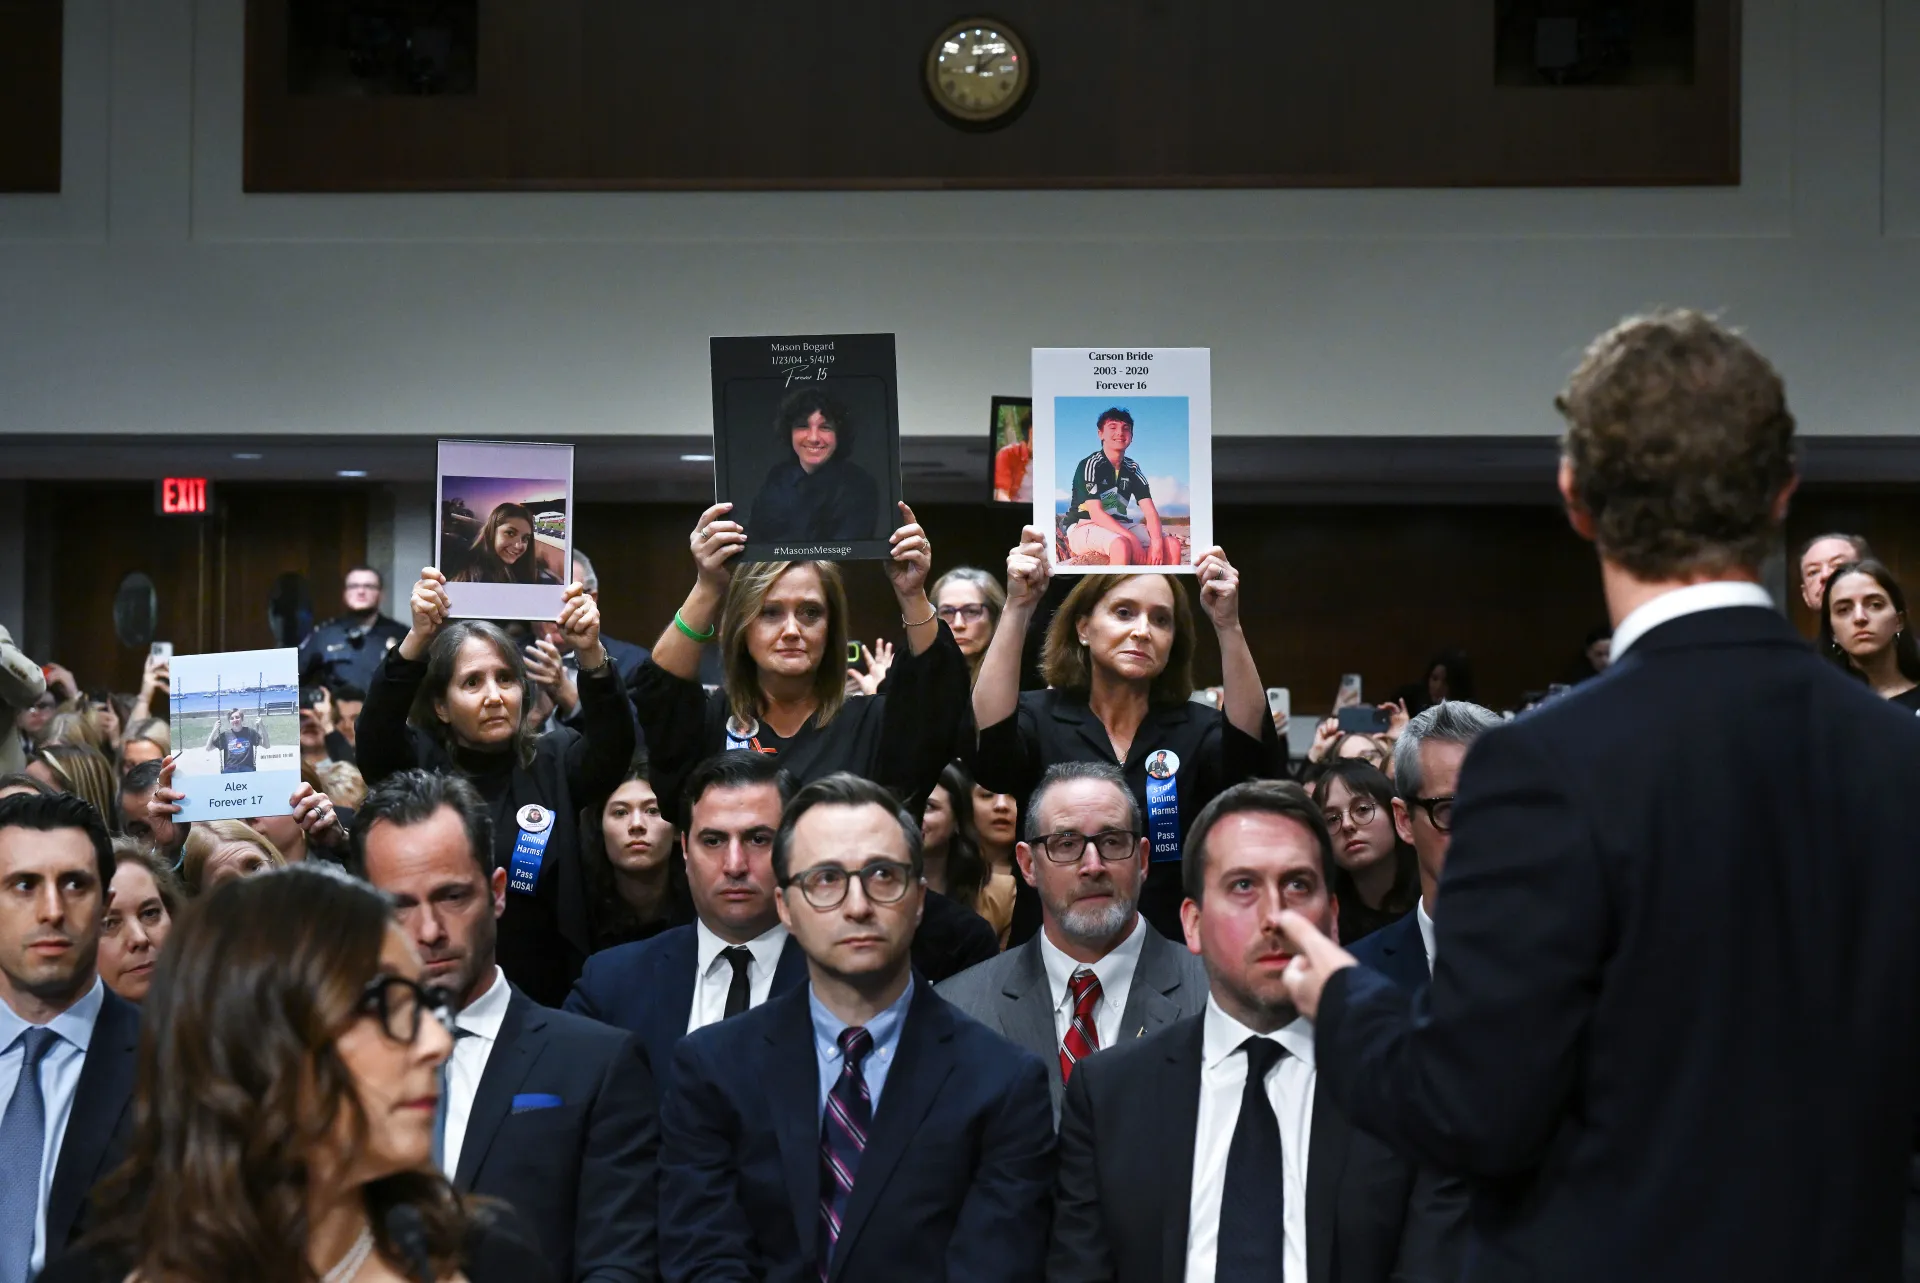 Meta CEO Mark Zuckerberg apologizes to parents of victims of online exploitation in heated Senate hearing